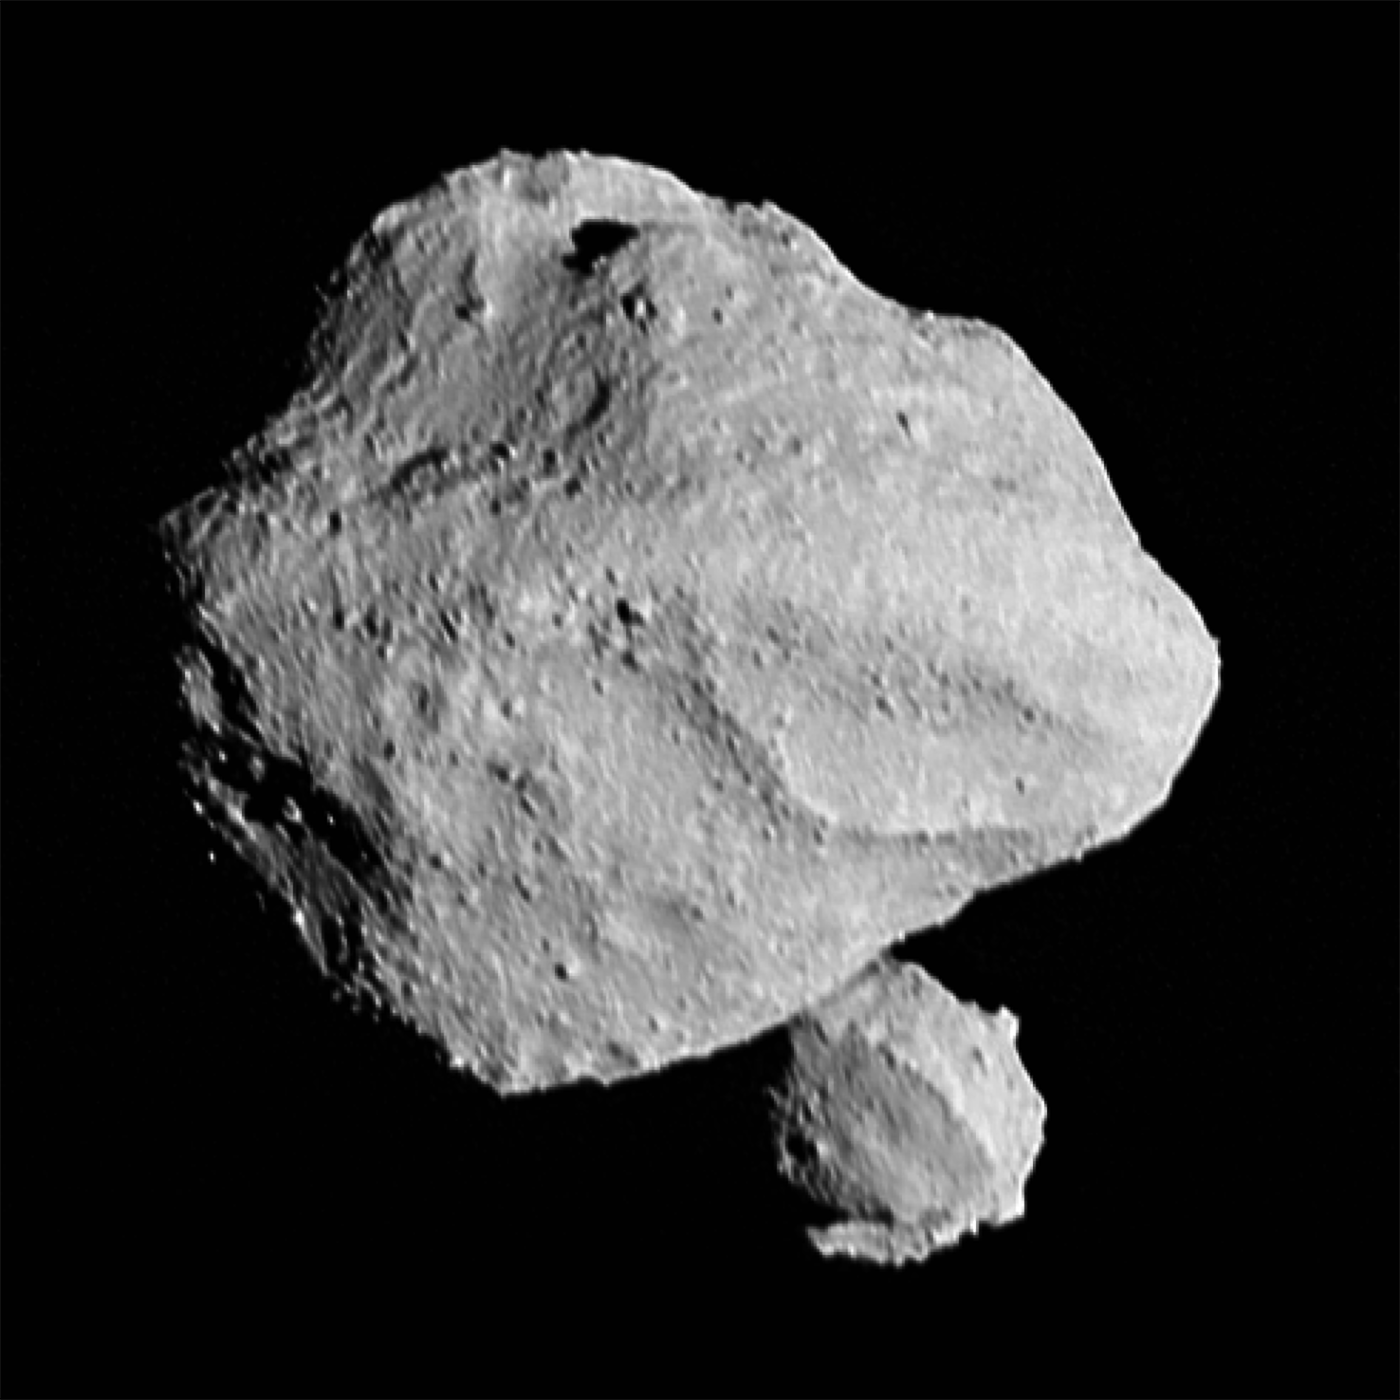 Lucy's first asteroid flyby reveals a surprise moon